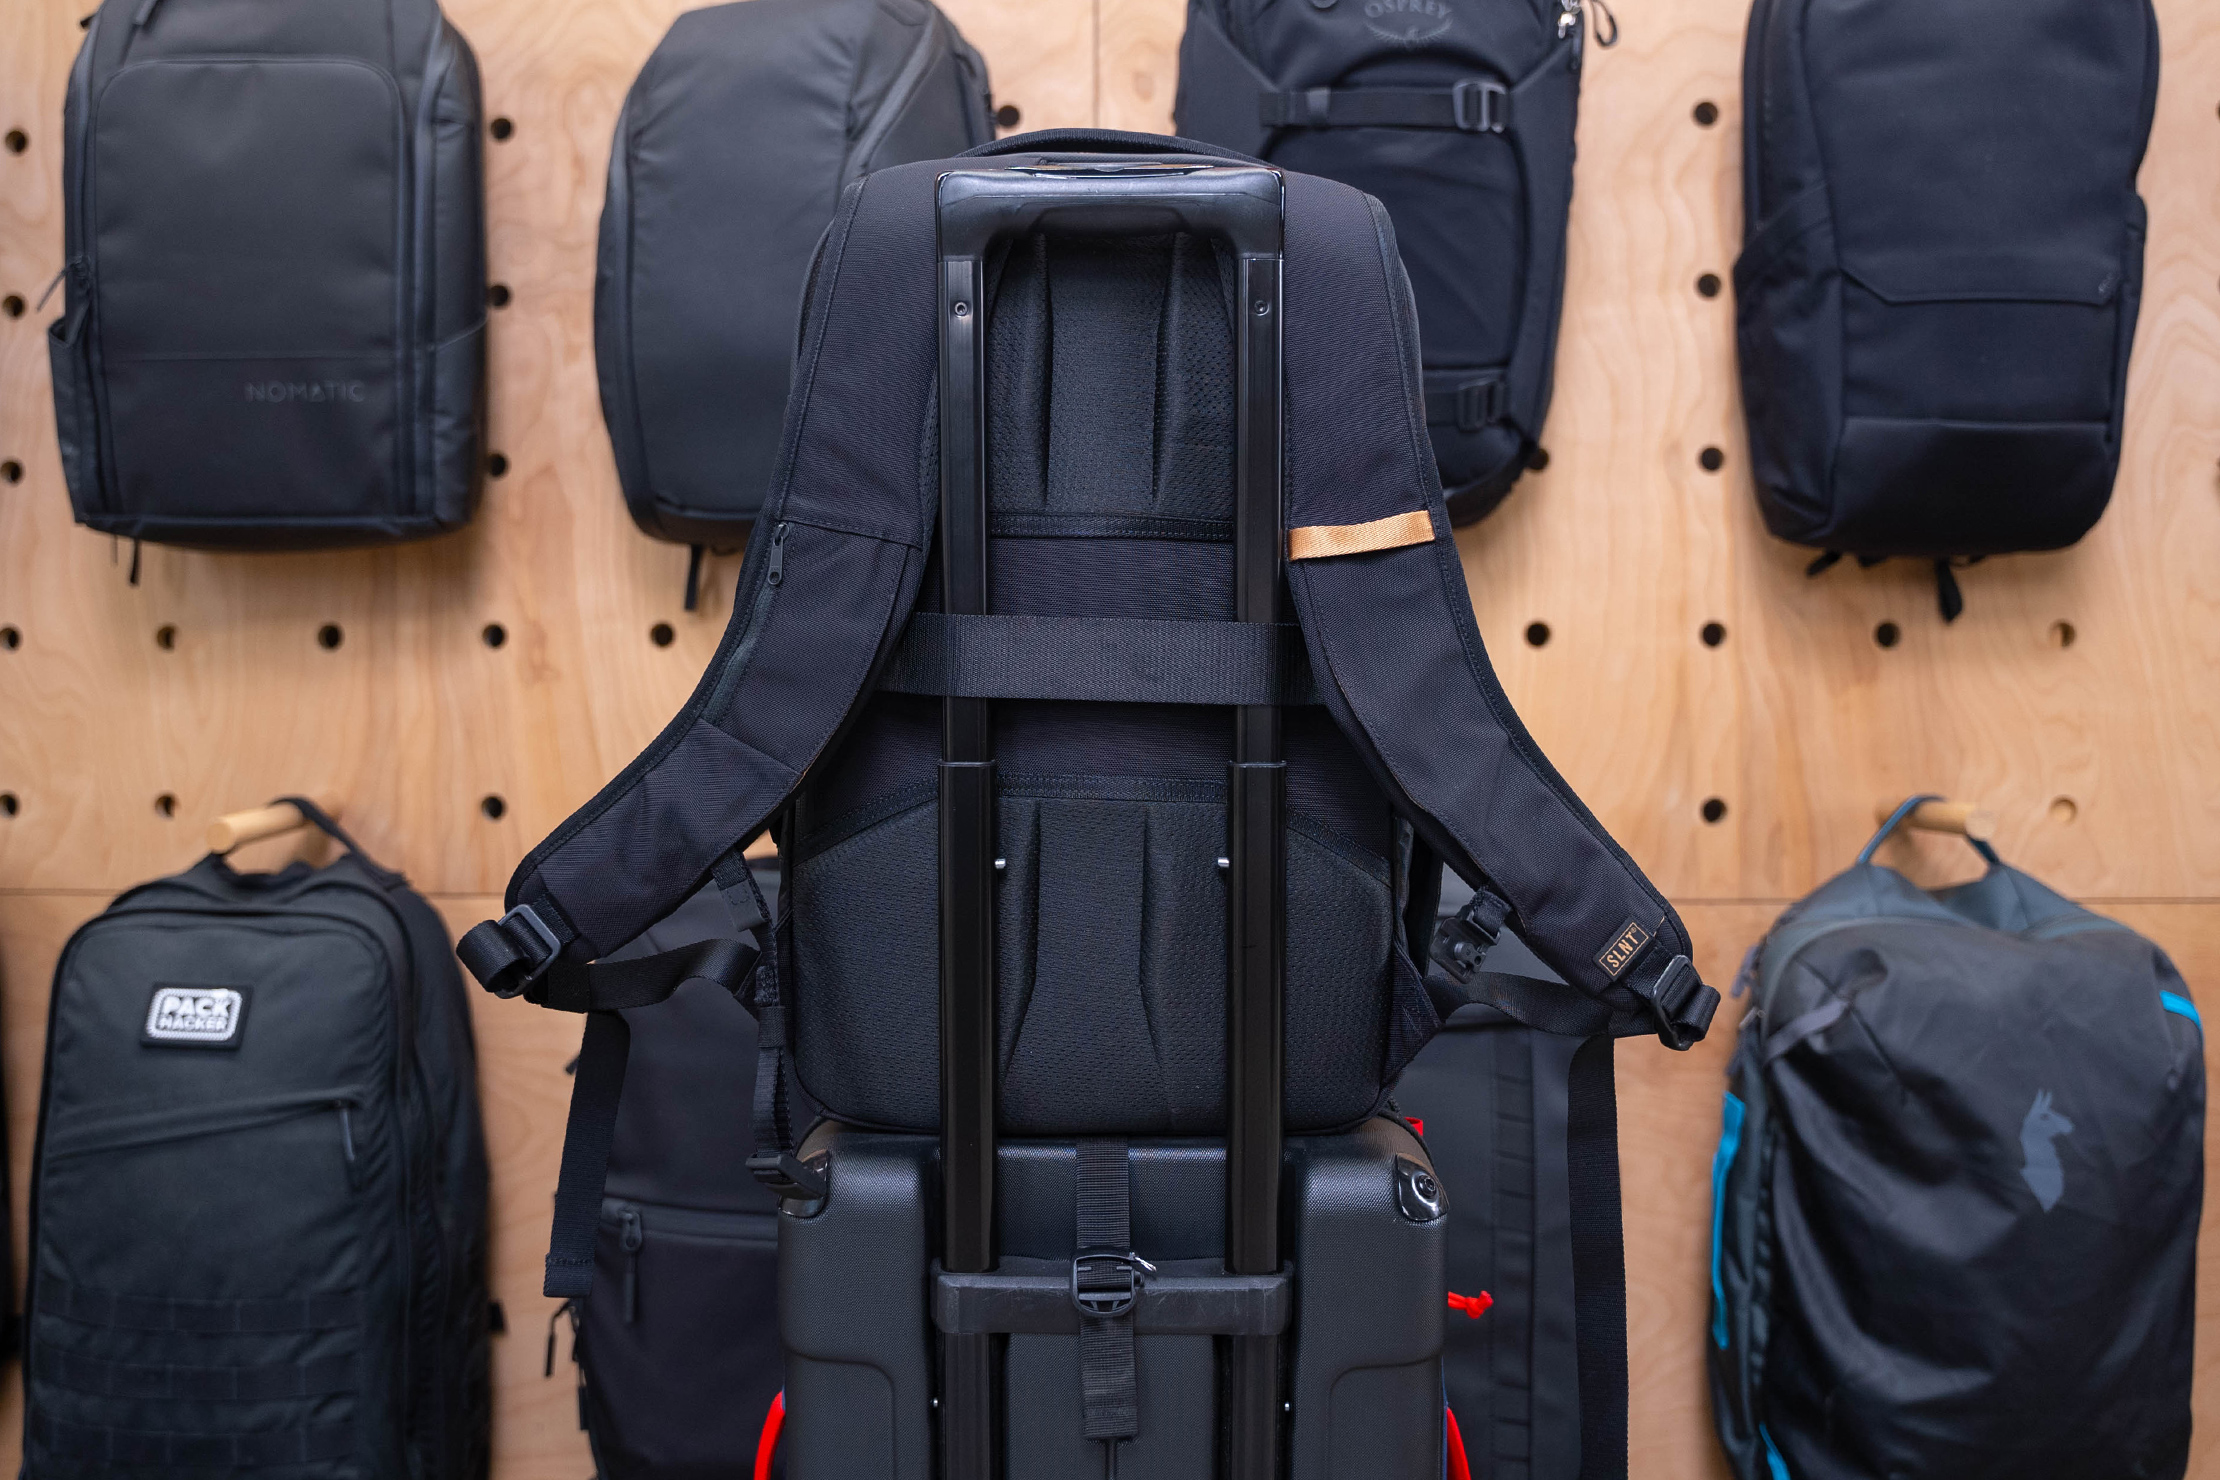 SLNT E3 Faraday Backpack Luggage Pass Through